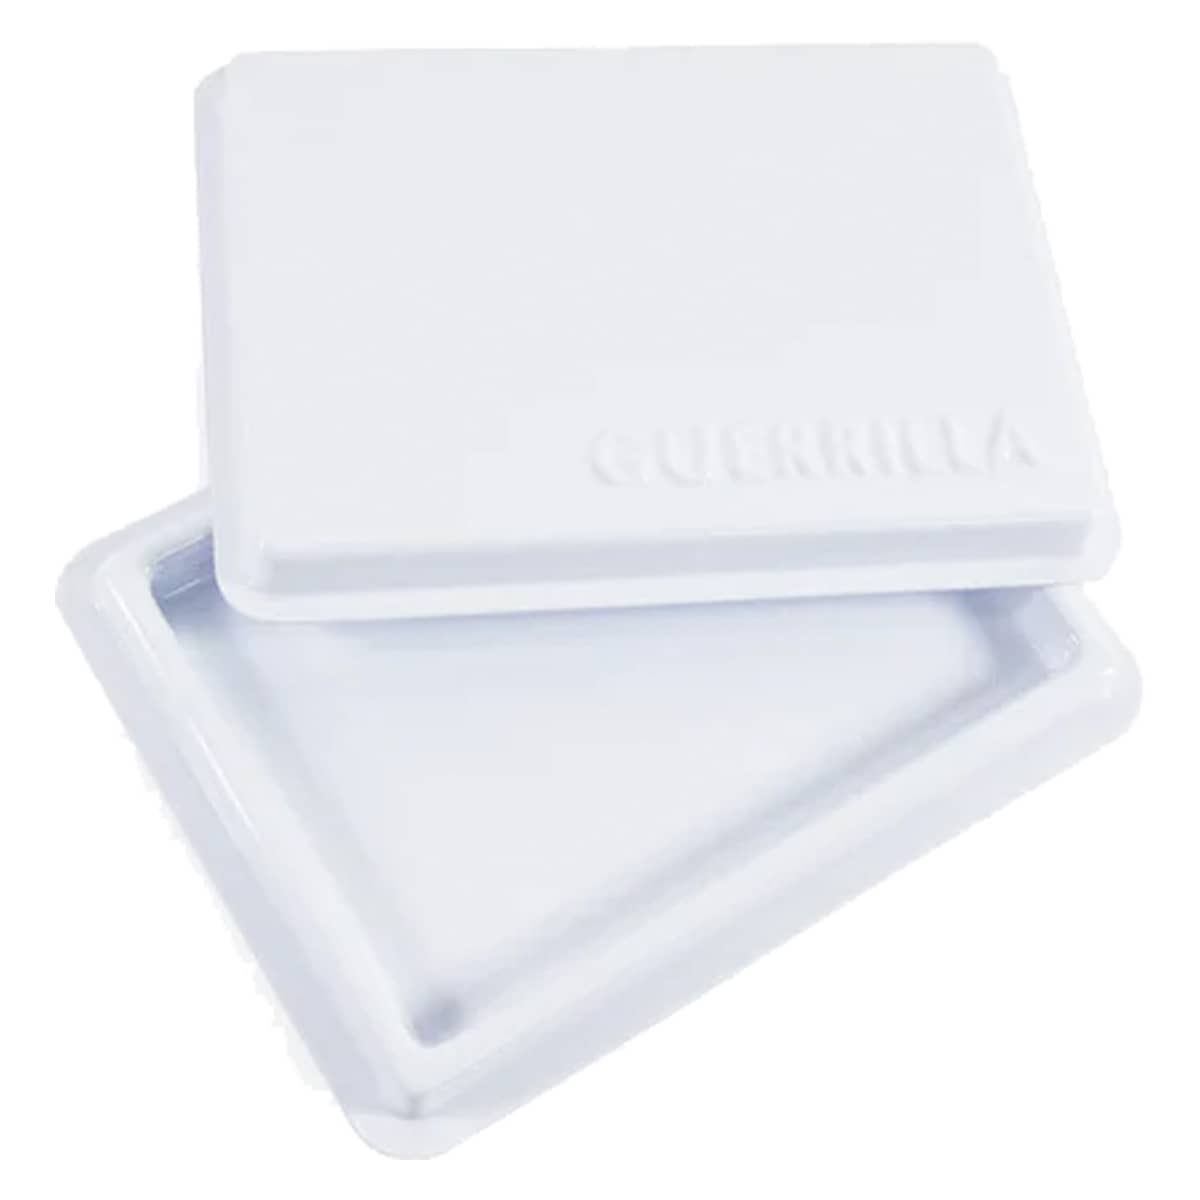 Guerrilla Painter Backpacker™ Covered Palette Tray, 6"x8"